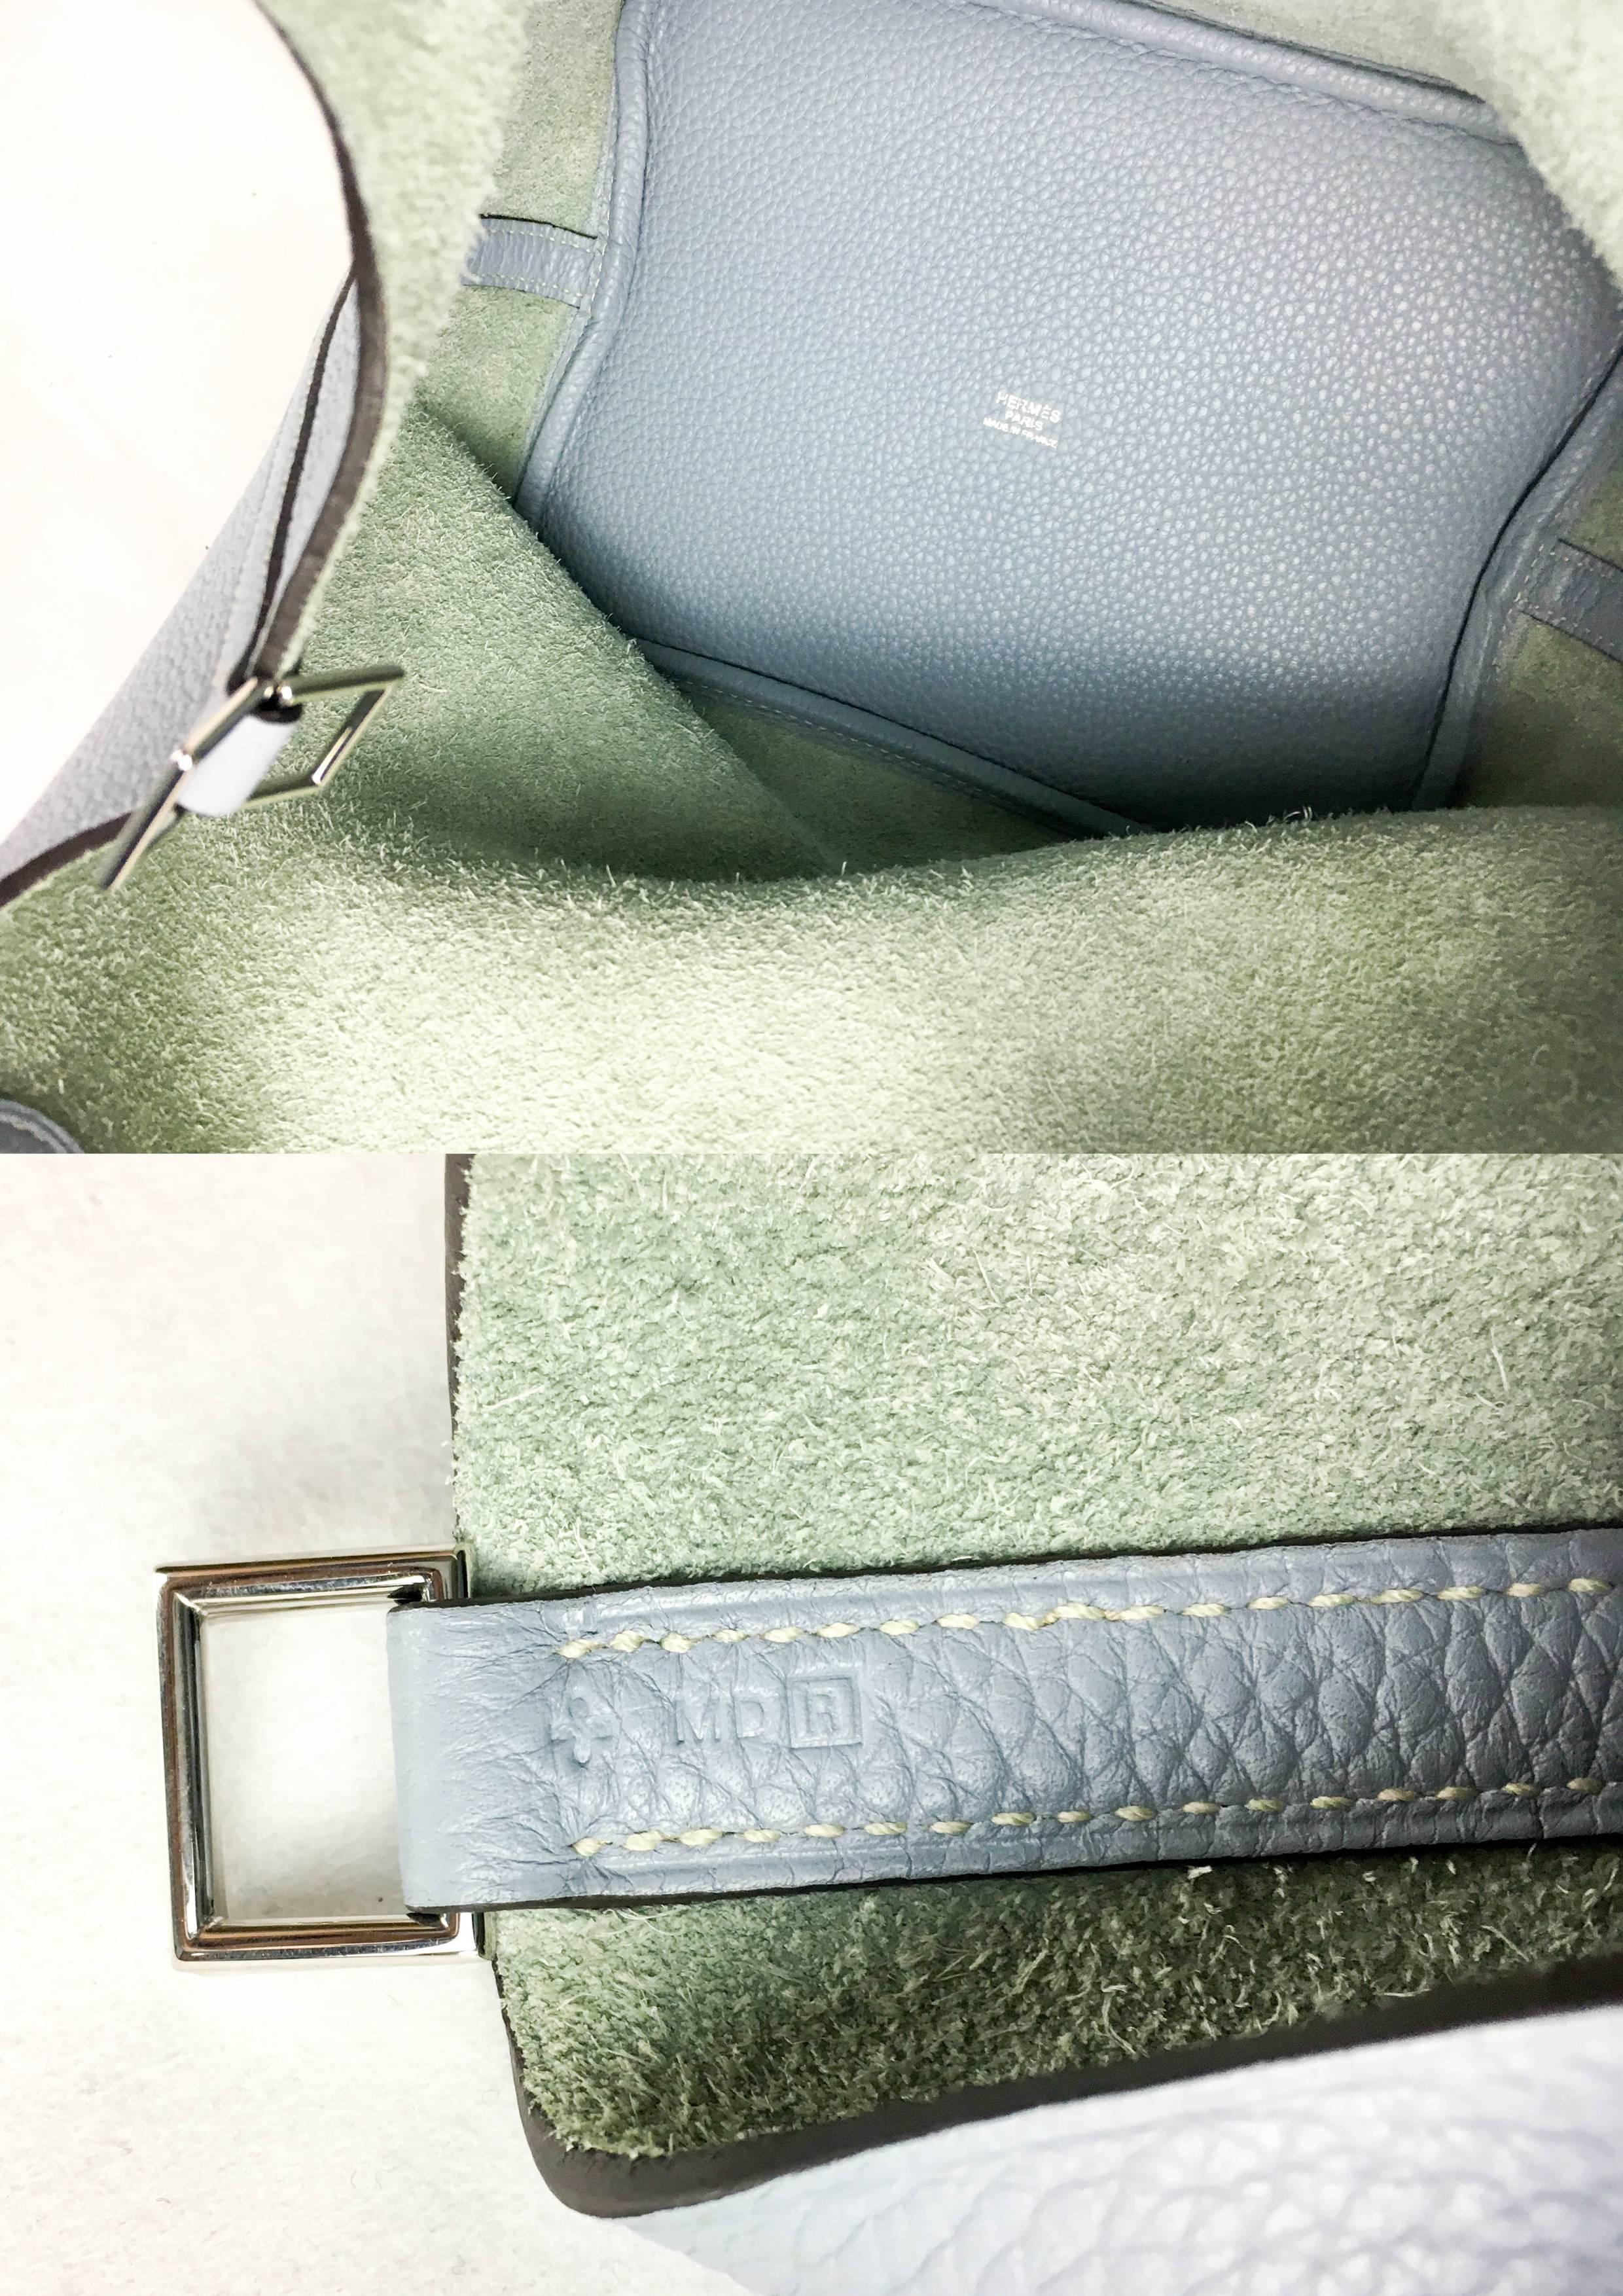 2014 Hermes Picotin 22 Handbag in Pale Blue Clemence Leather For Sale 2